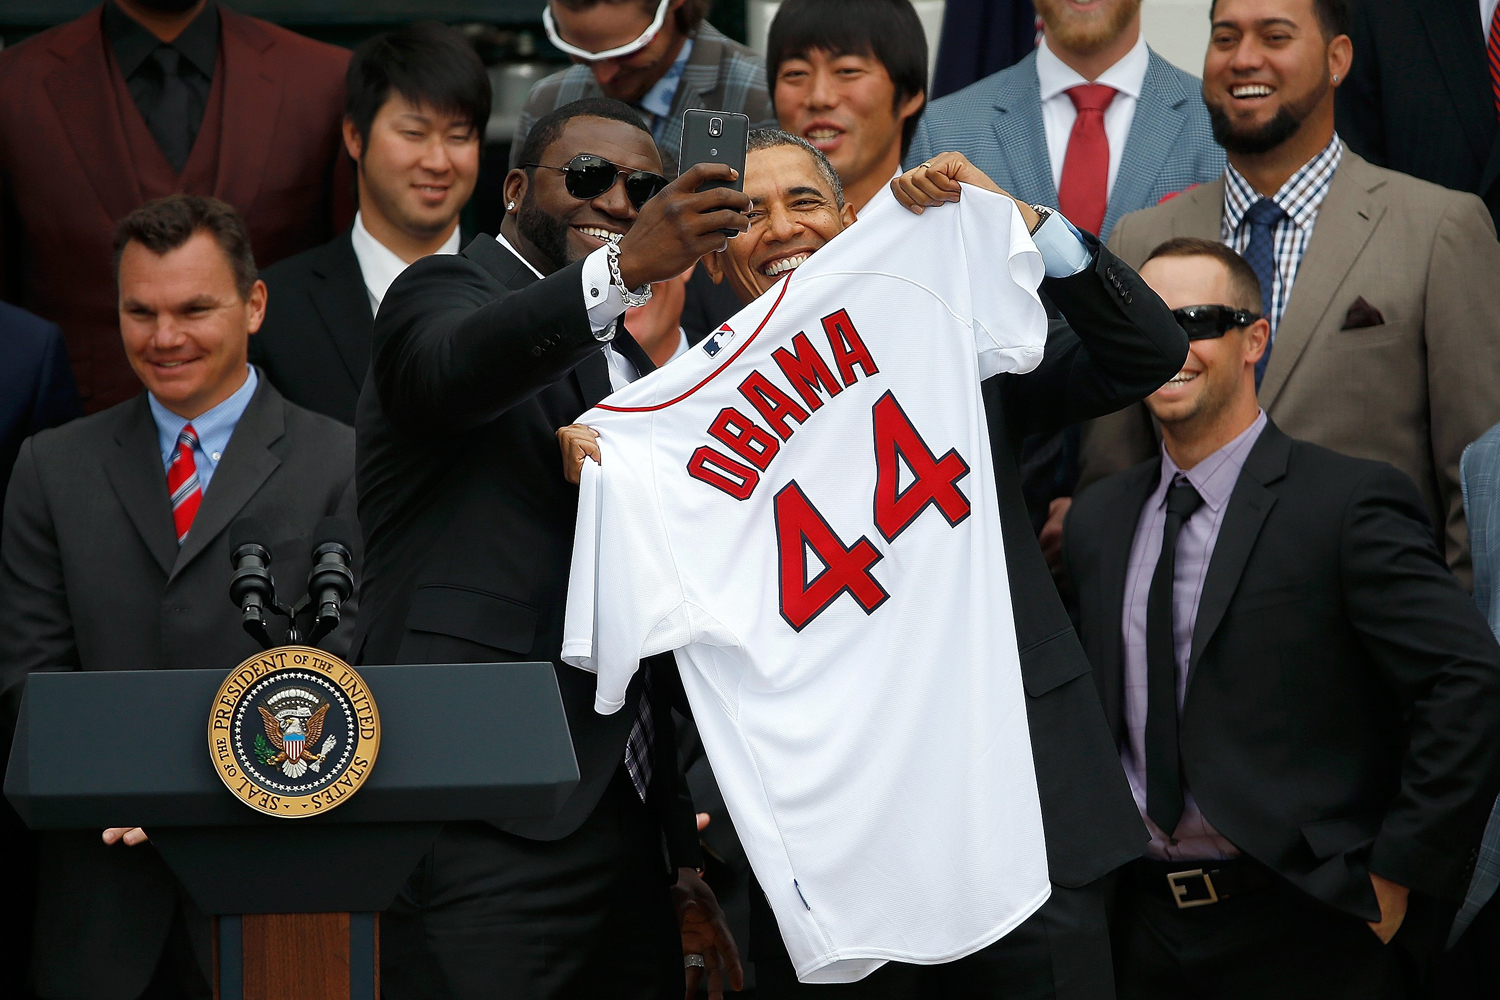 Apr. 1, 2014. Boston Red Sox designated hitter David Ortiz (3rd L) poses for a  selfie  with U.S. President Barack Obama during a ceremony on the South Lawn of the White House to honor the 2013 World Series Champion Boston Red Sox in Washington, DC.